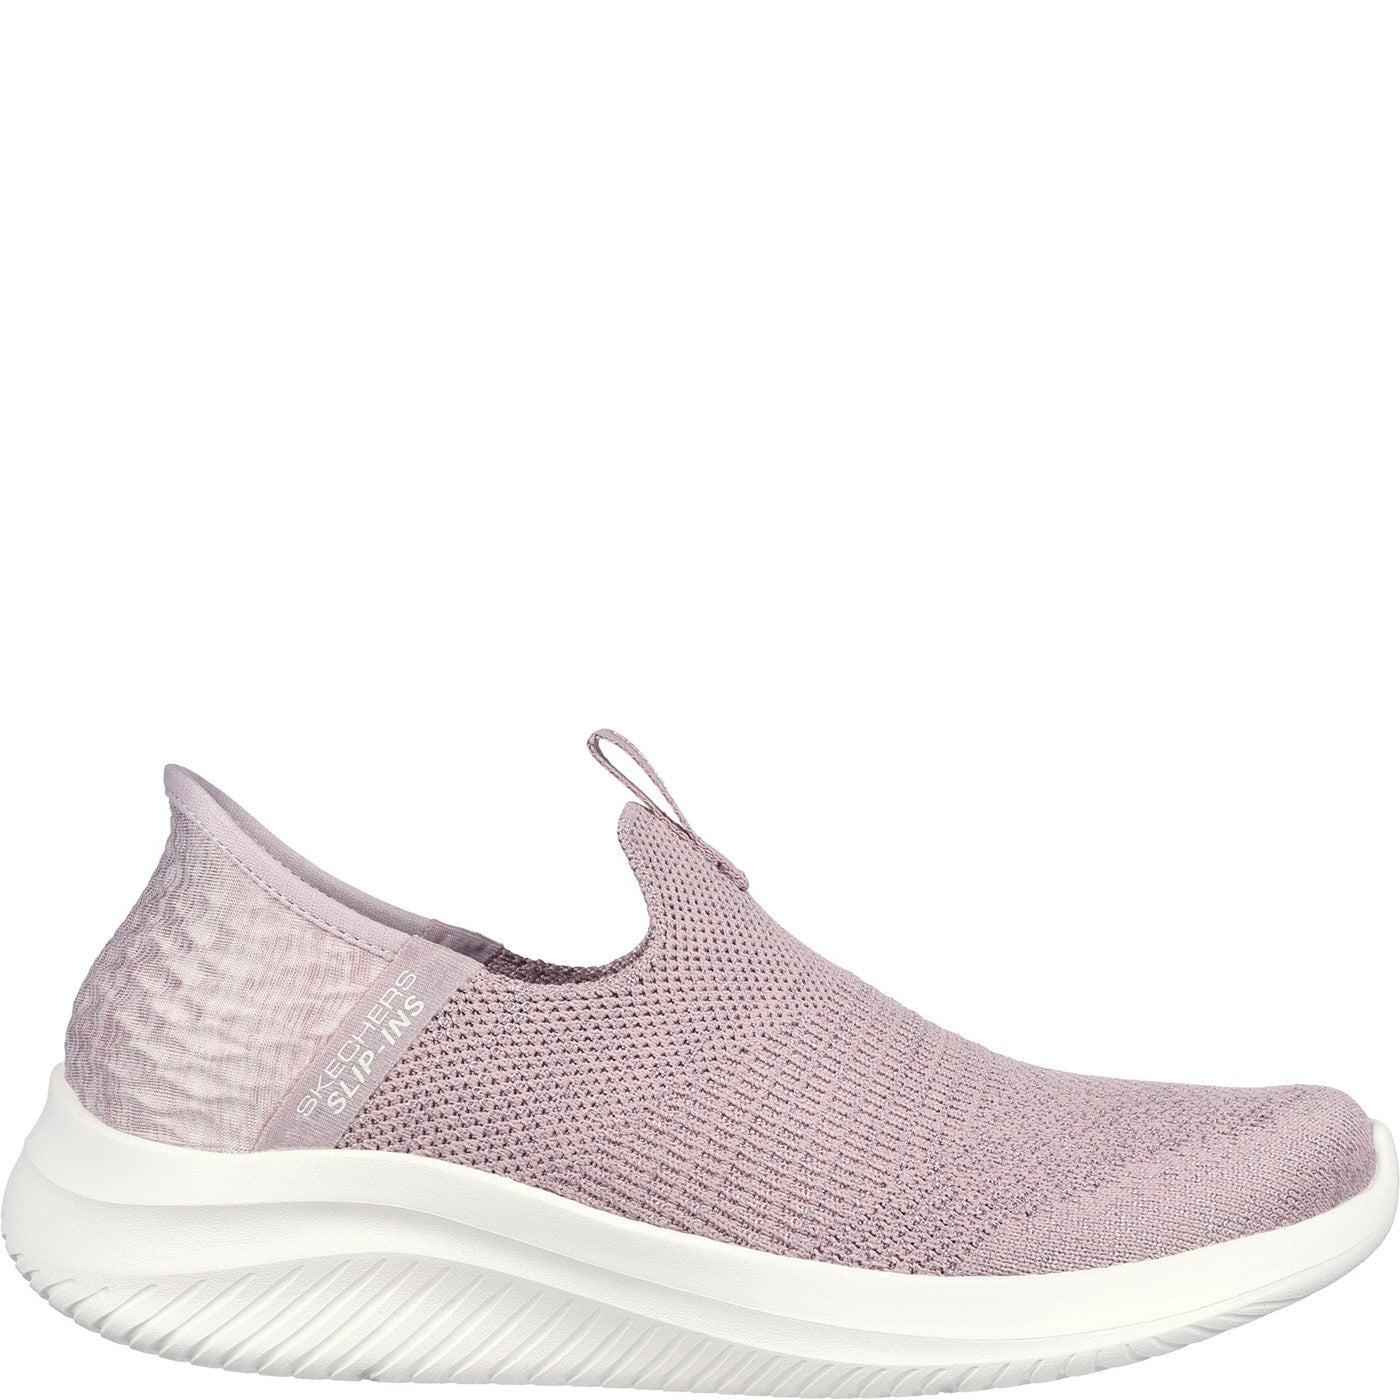 Women's Skechers Ultra Flex 3.0 Smooth Step Shoes